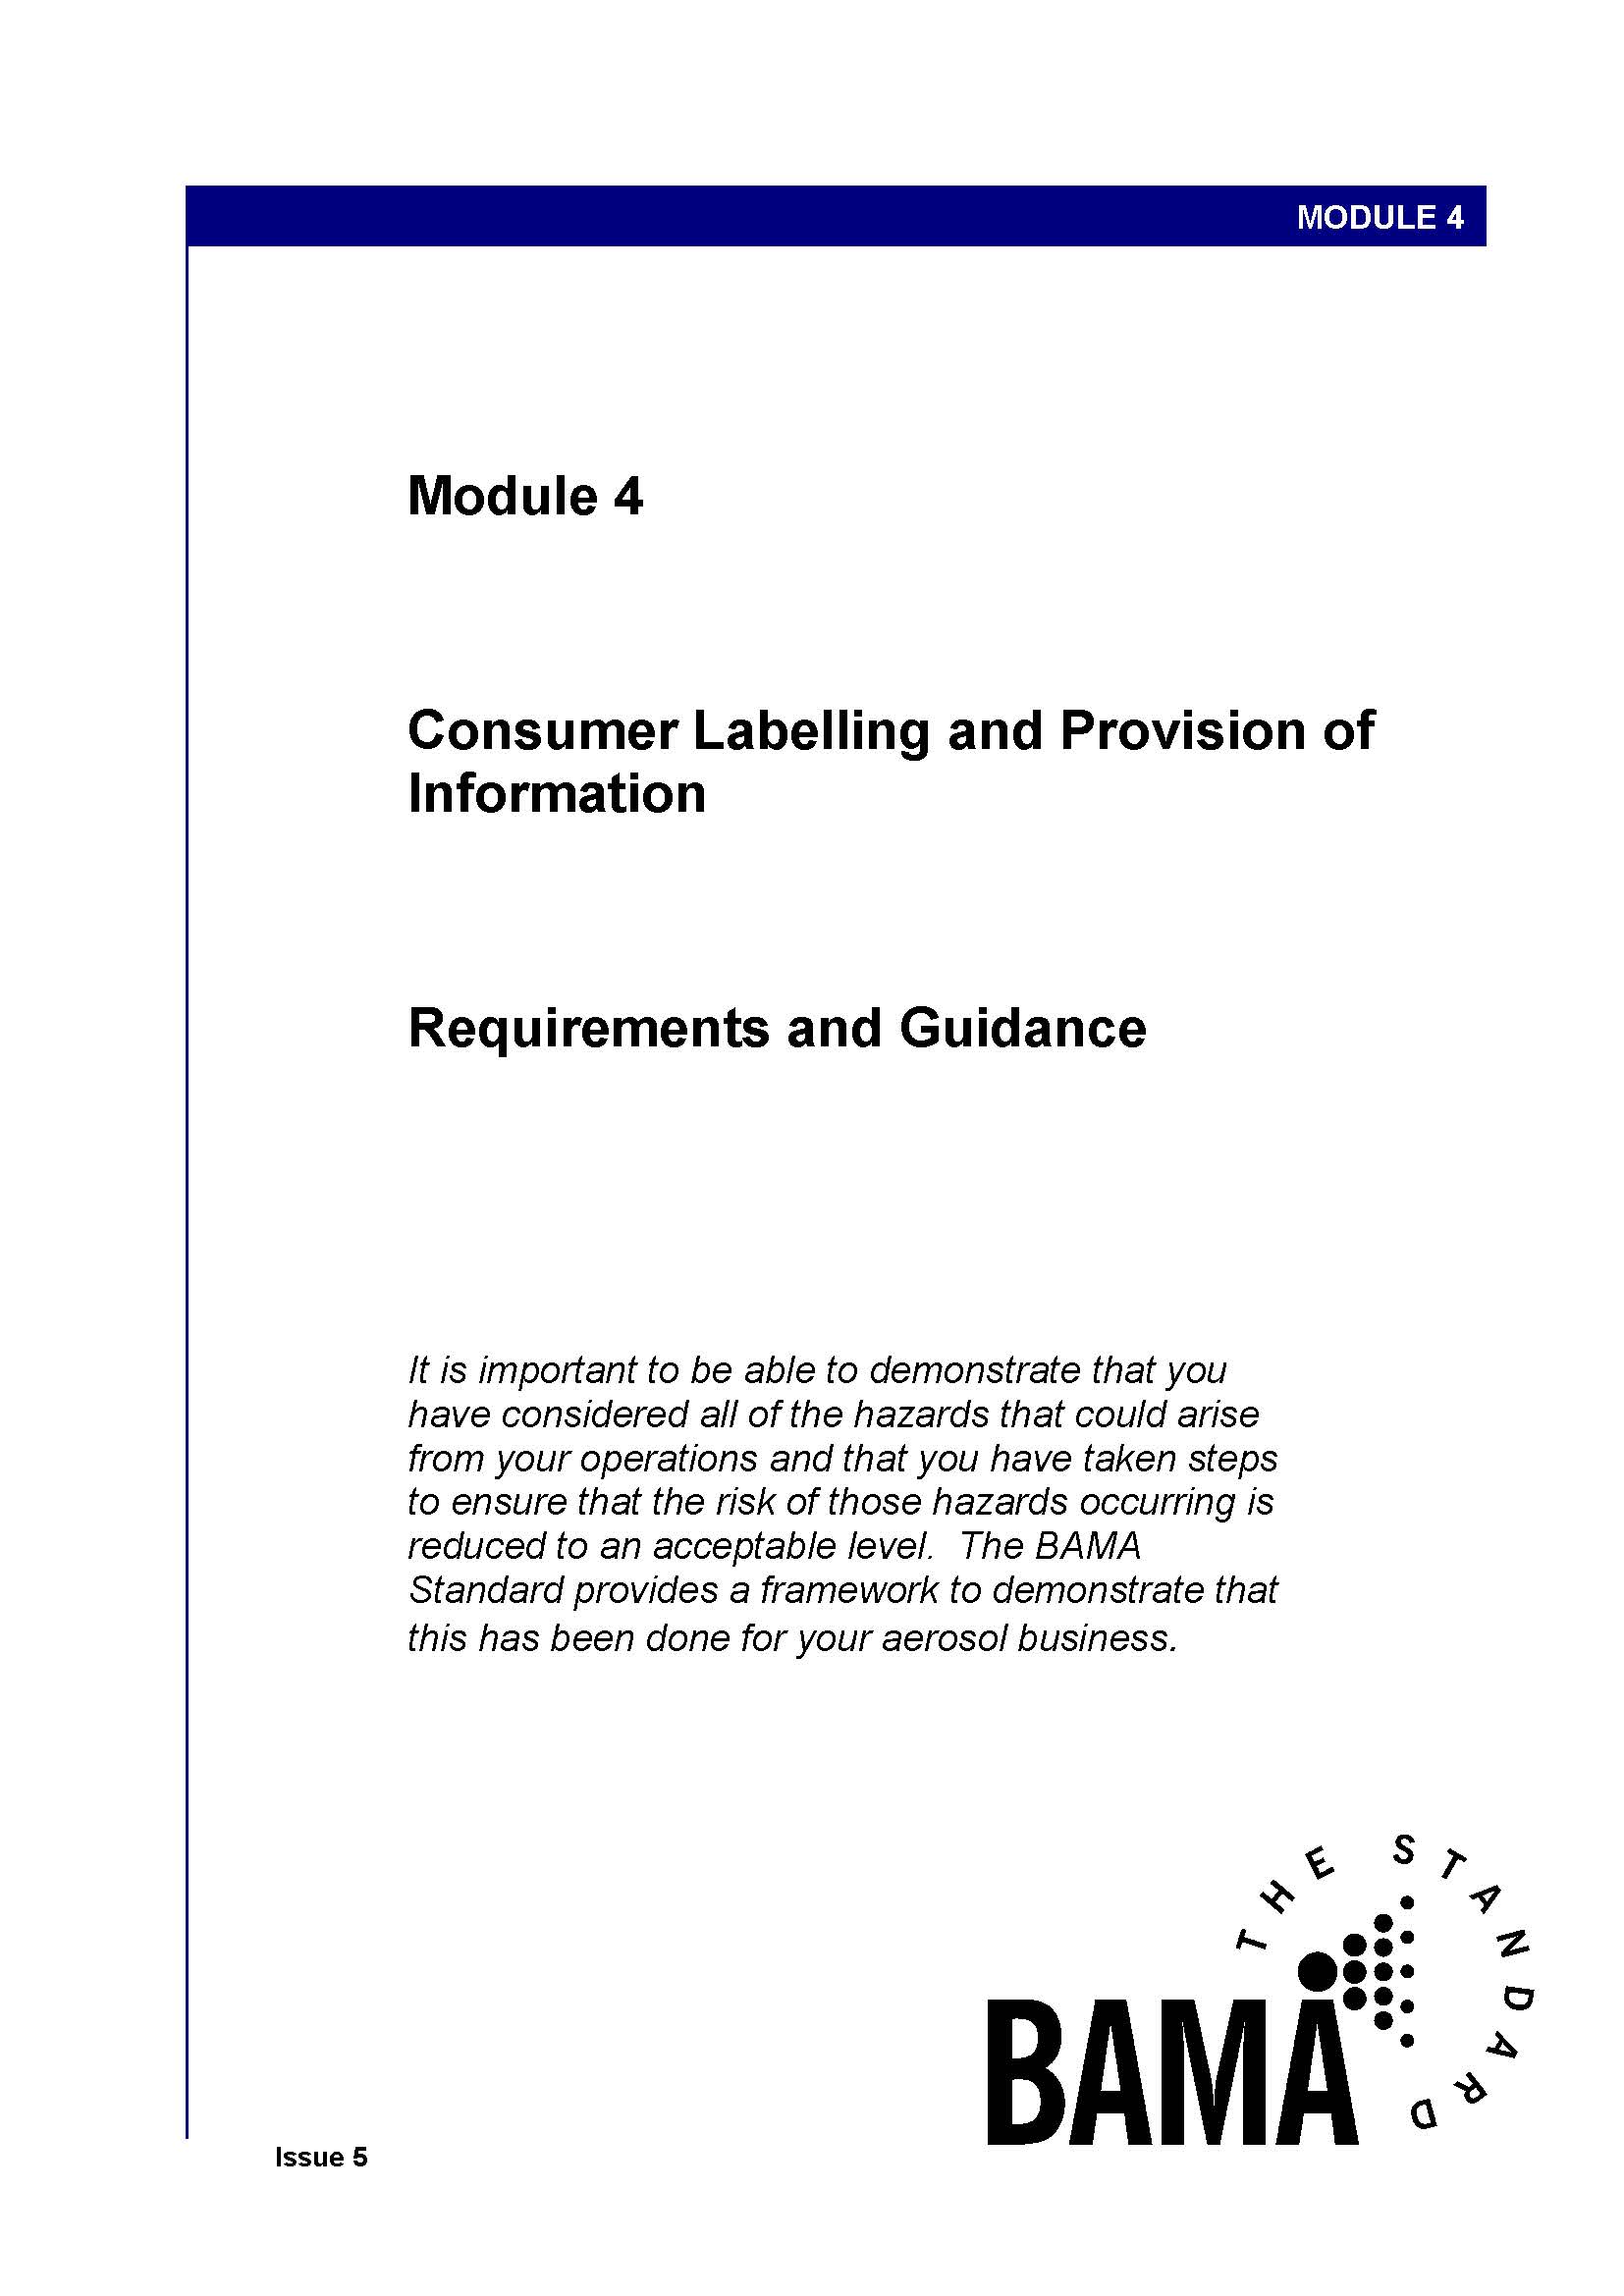 BAMA Standard Module 4 - Consumer Labelling and Provision of  Information